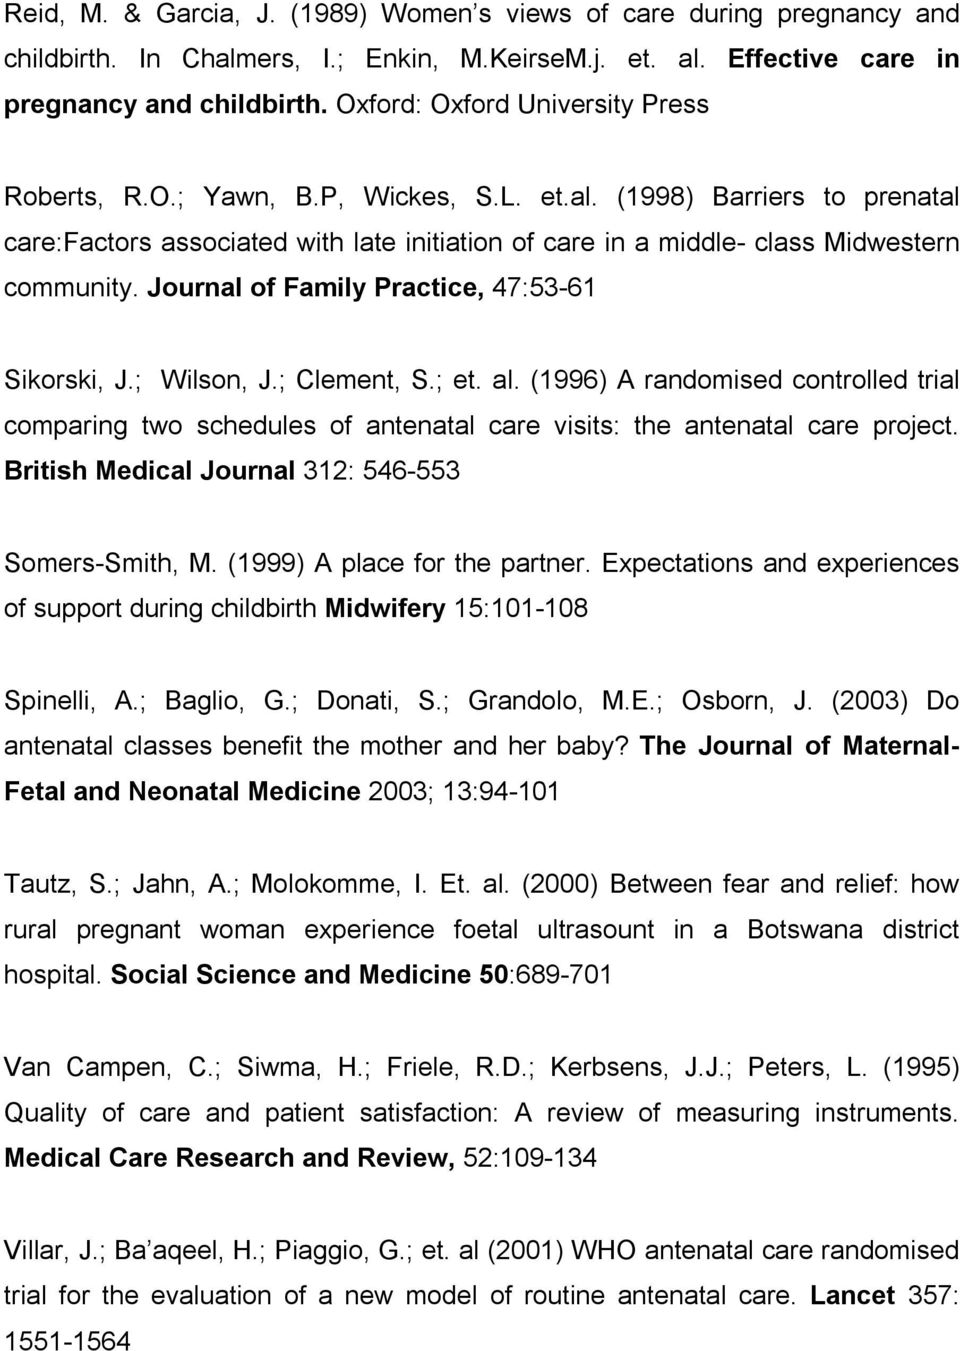 Journal of Family Practice, 47:53-61 Sikorski, J.; Wilson, J.; Clement, S.; et. al. (1996) A randomised controlled trial comparing two schedules of antenatal care visits: the antenatal care project.